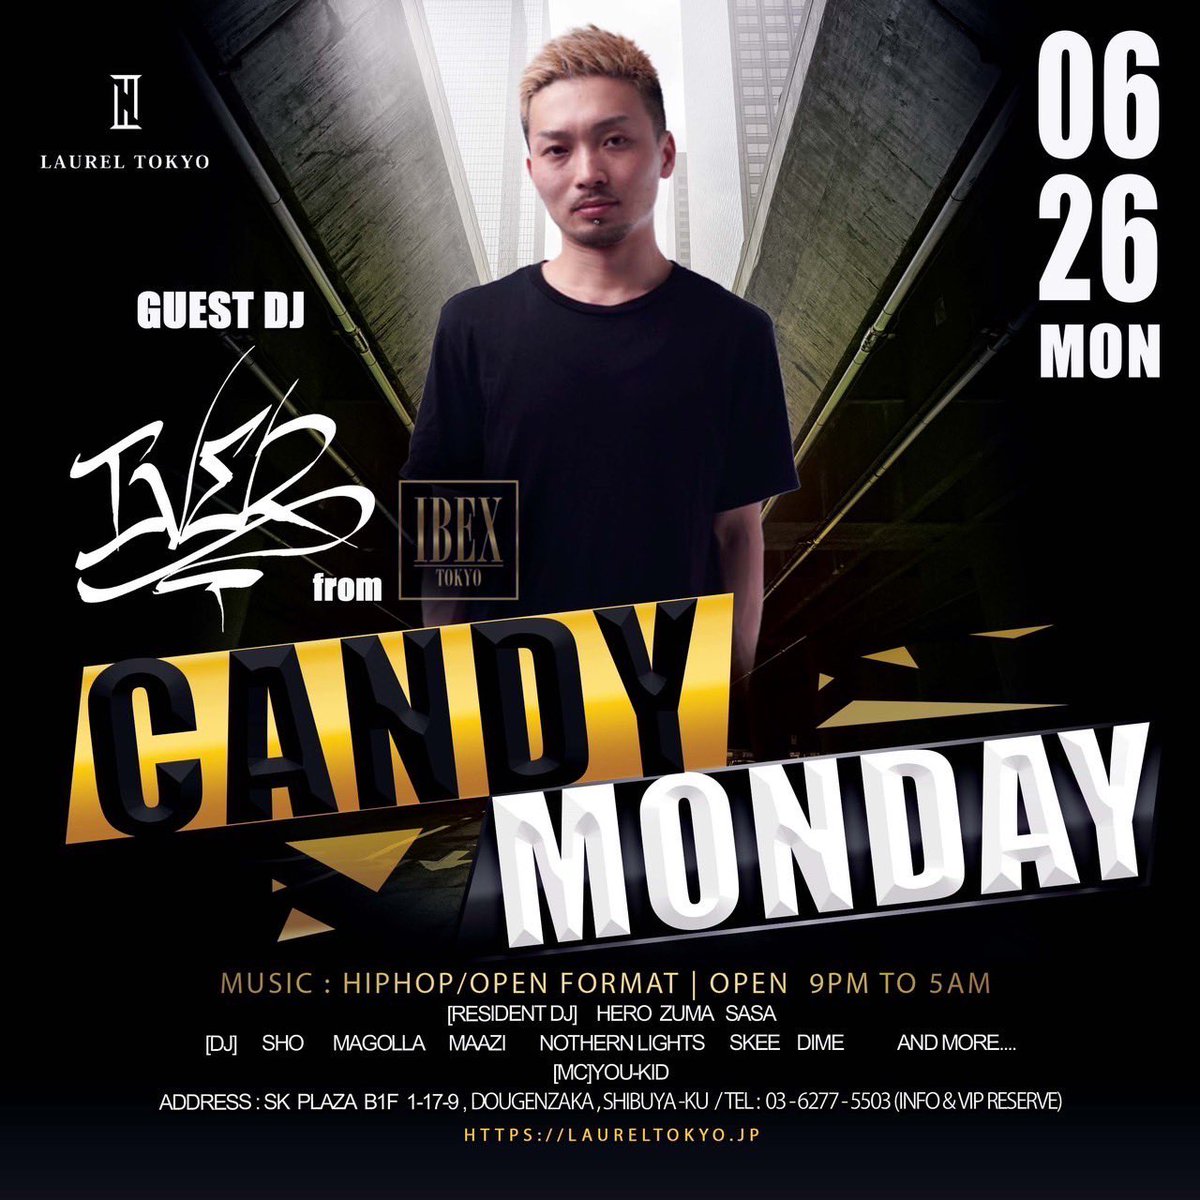 TONIGHT! CANDY MONDAY @laurel_tokyo GUEST: @iver_ibx お待ちしてます！